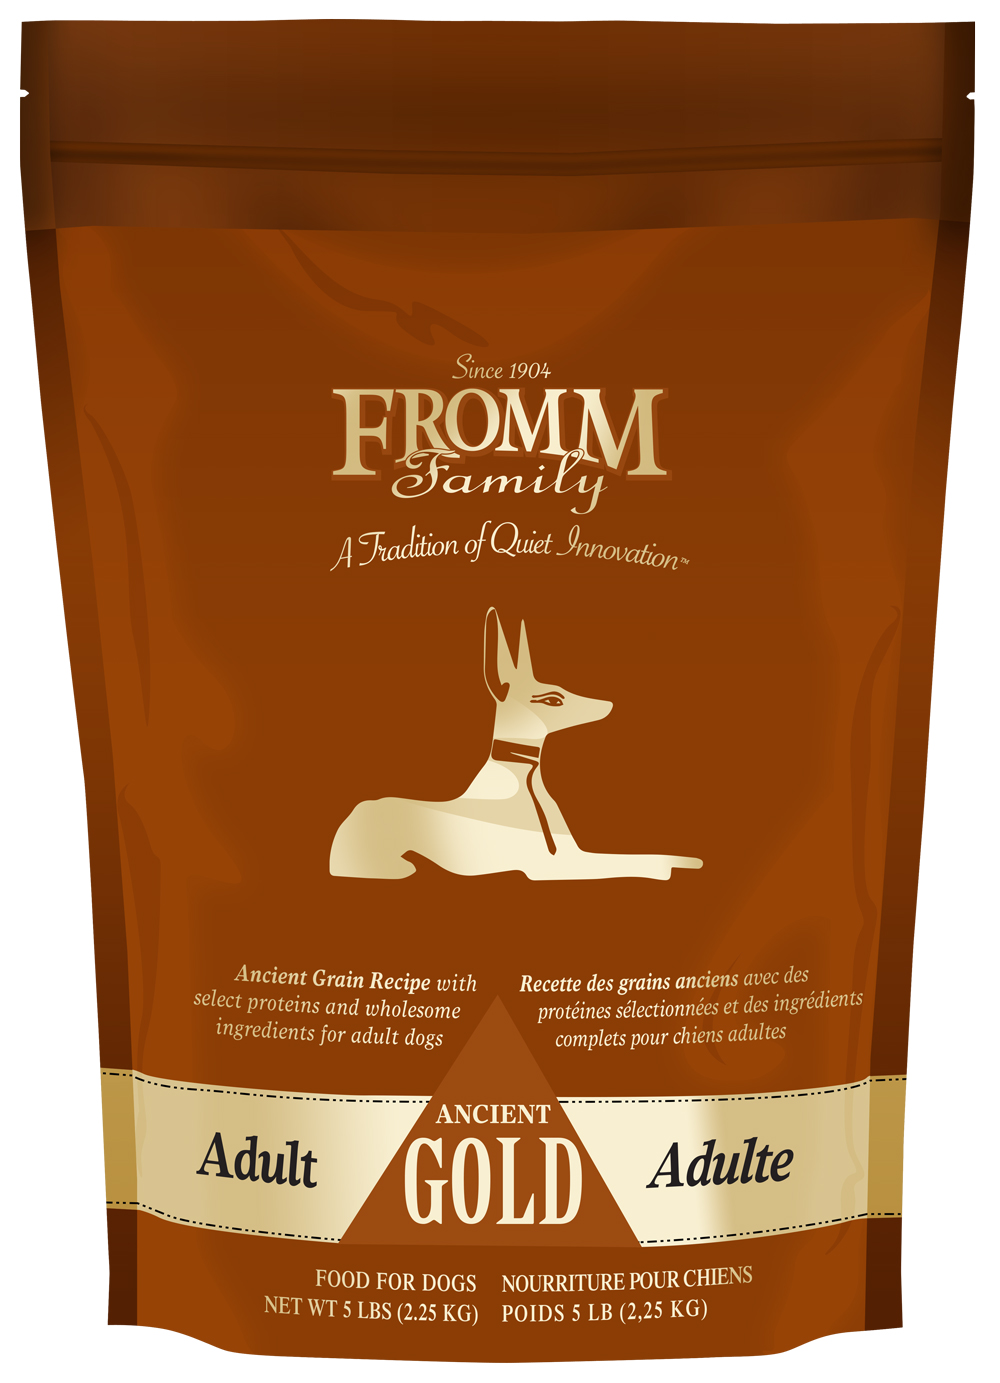 Fromm Family Adult Ancient Gold Food for Dogs, 5 lbs